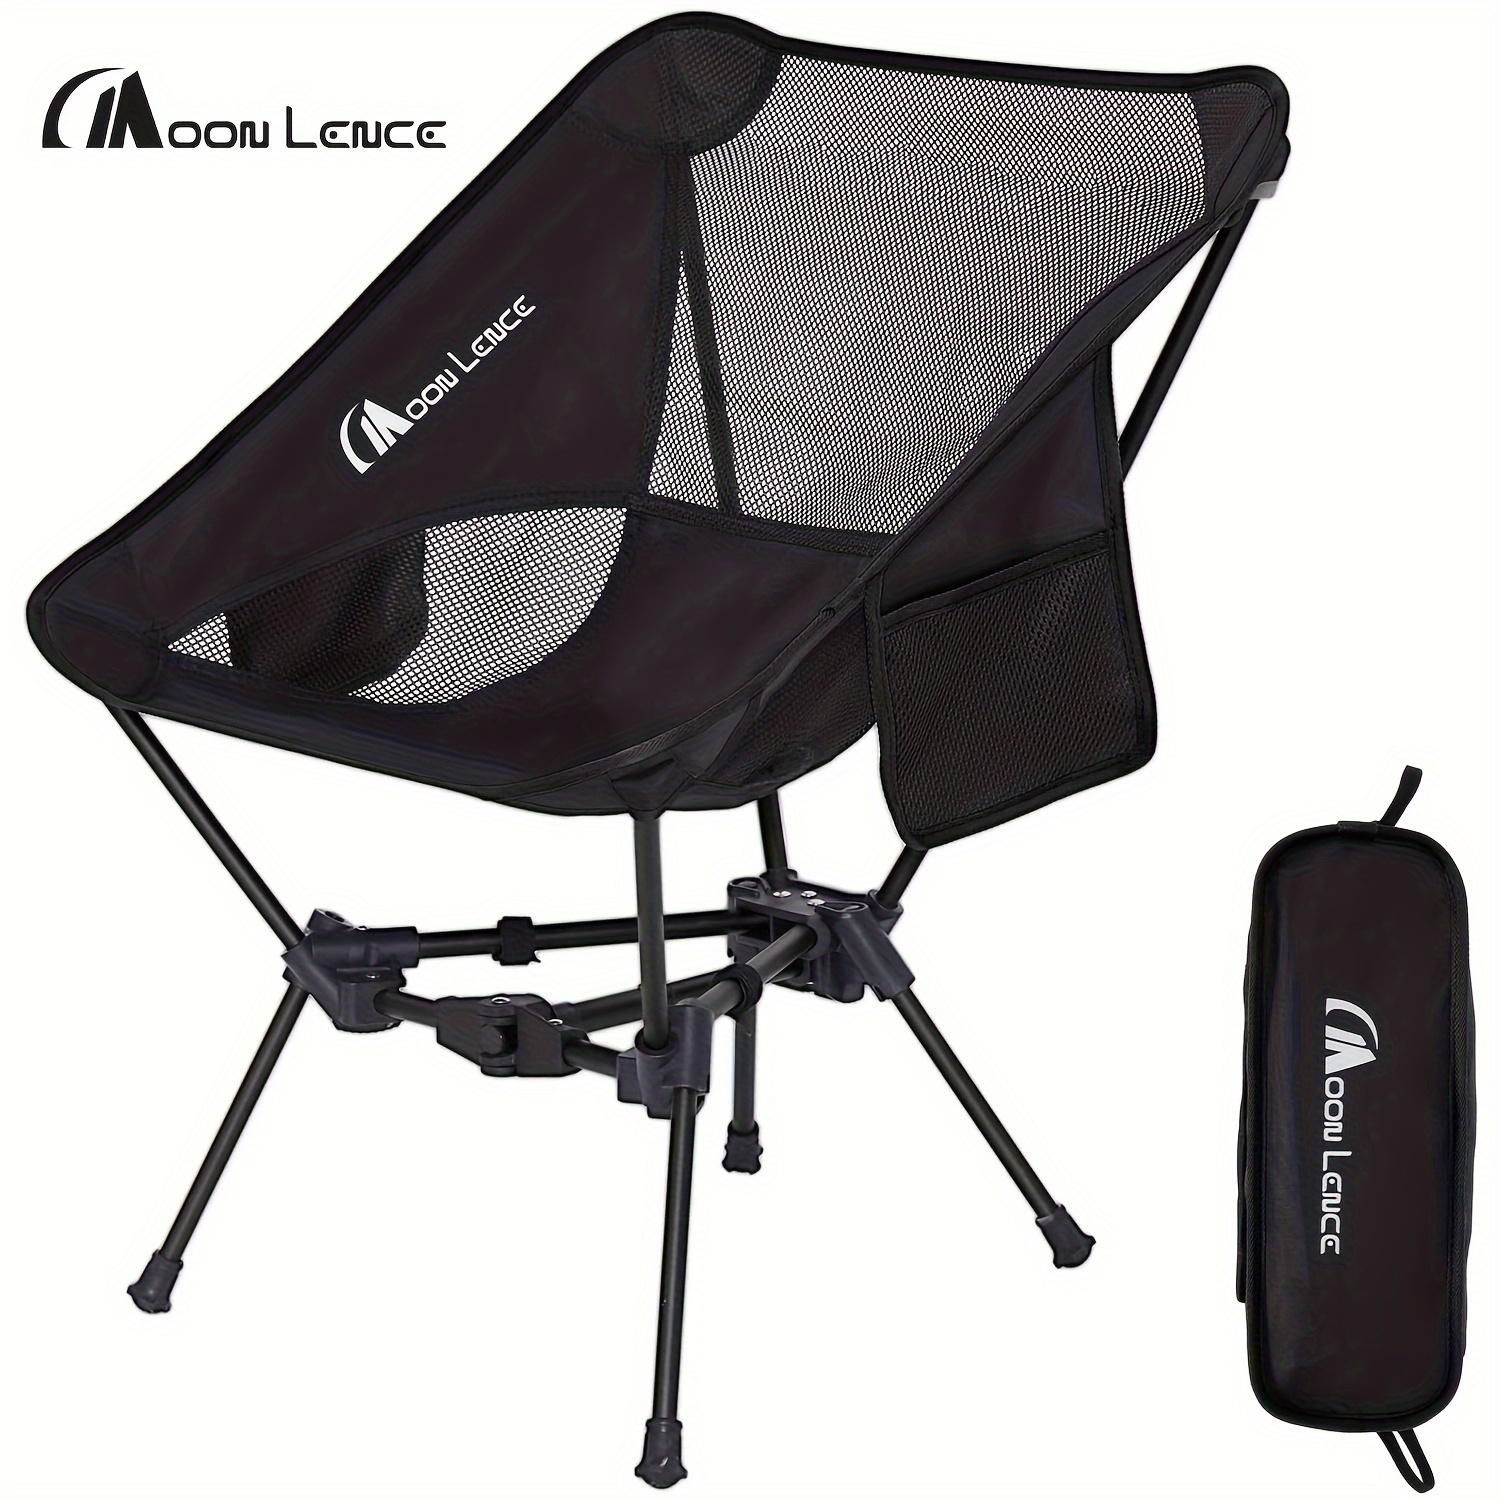 

Moon Lence Portable Camping Chair Backpacking Chair - The 4th Generation Ultralight Folding Chair - Compact, Lightweight Foldable Chairs For Hiking Mountaineering Beach